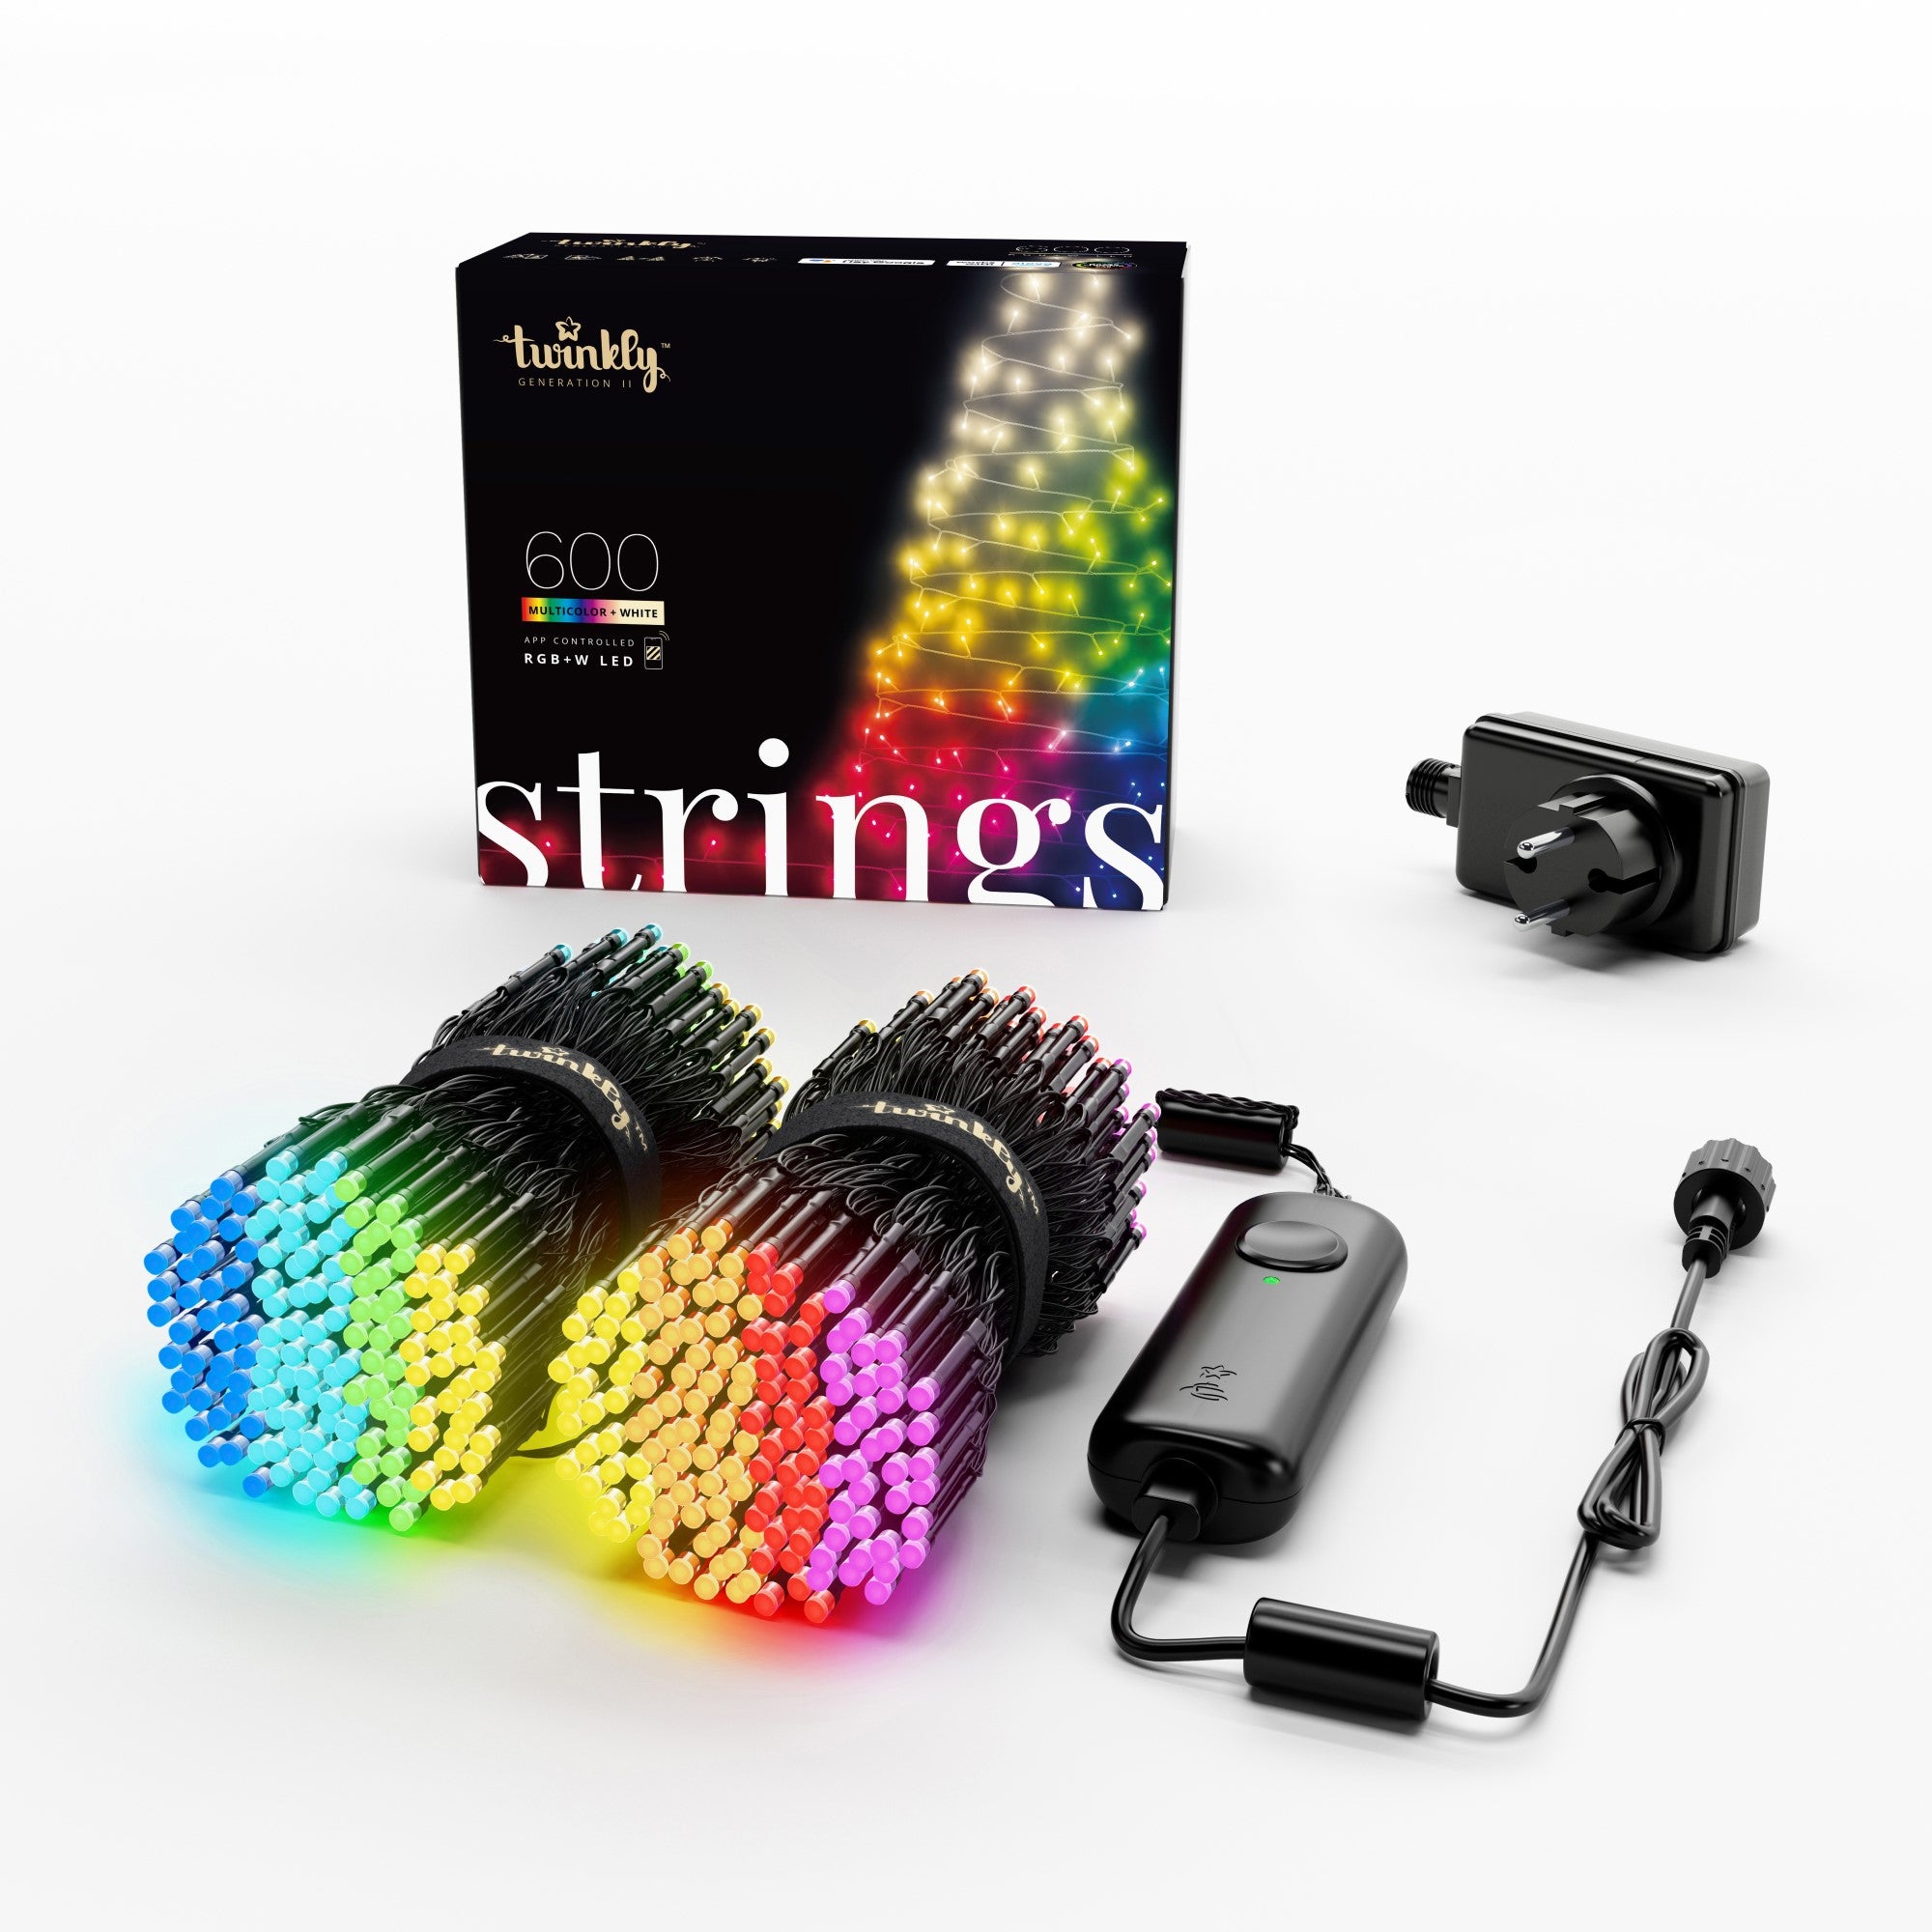 Twinkly Strings LED fairy lights RGB+W app controlled 600 LEDs 48m